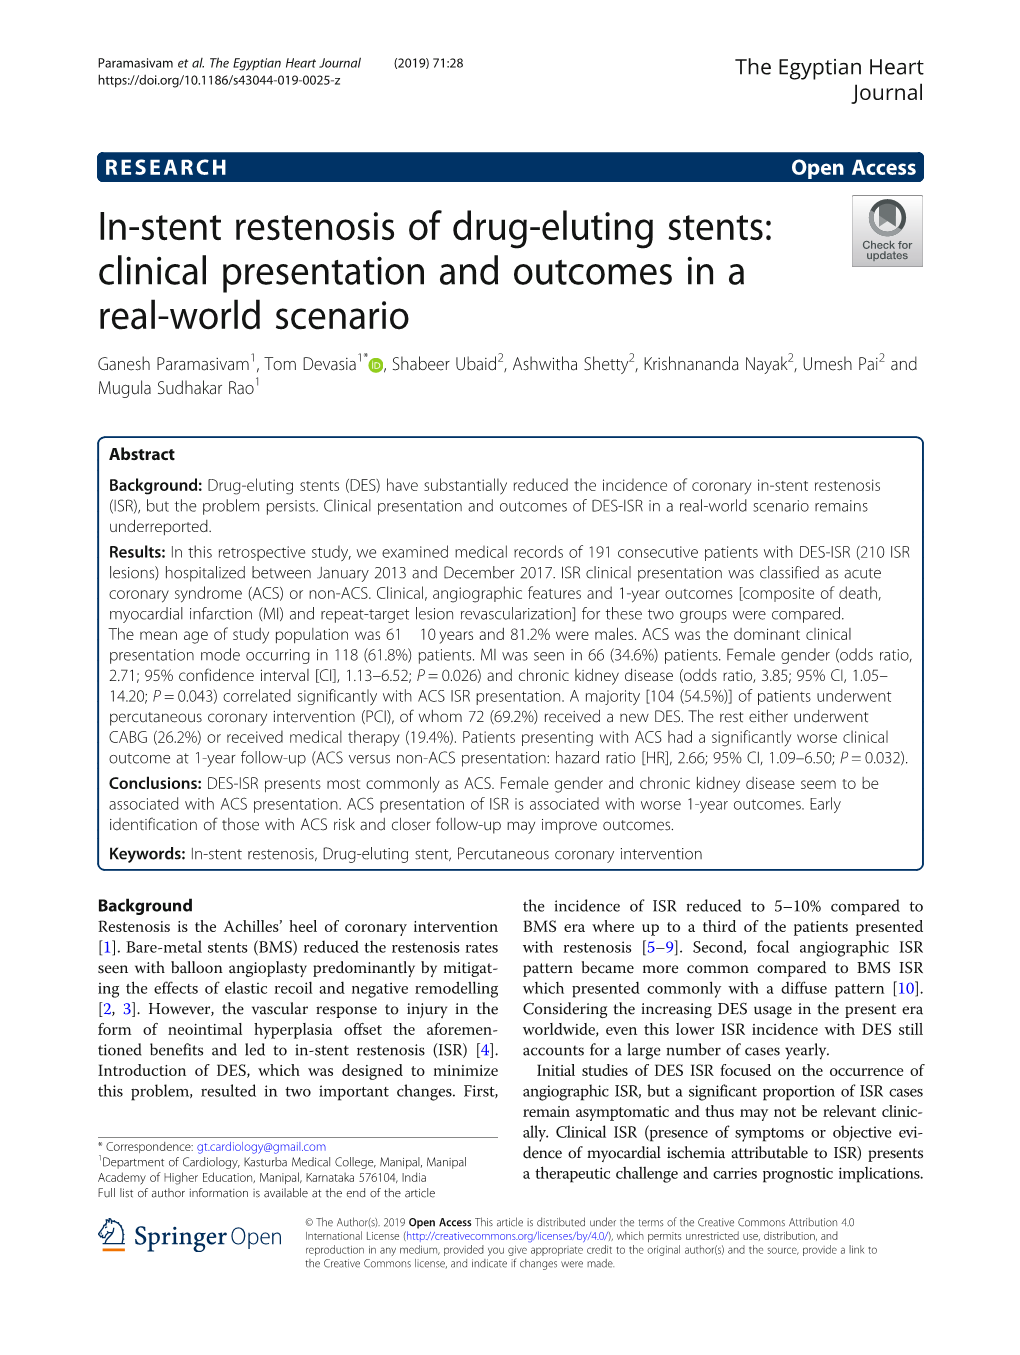 In-Stent Restenosis of Drug-Eluting Stents: Clinical Presentation And